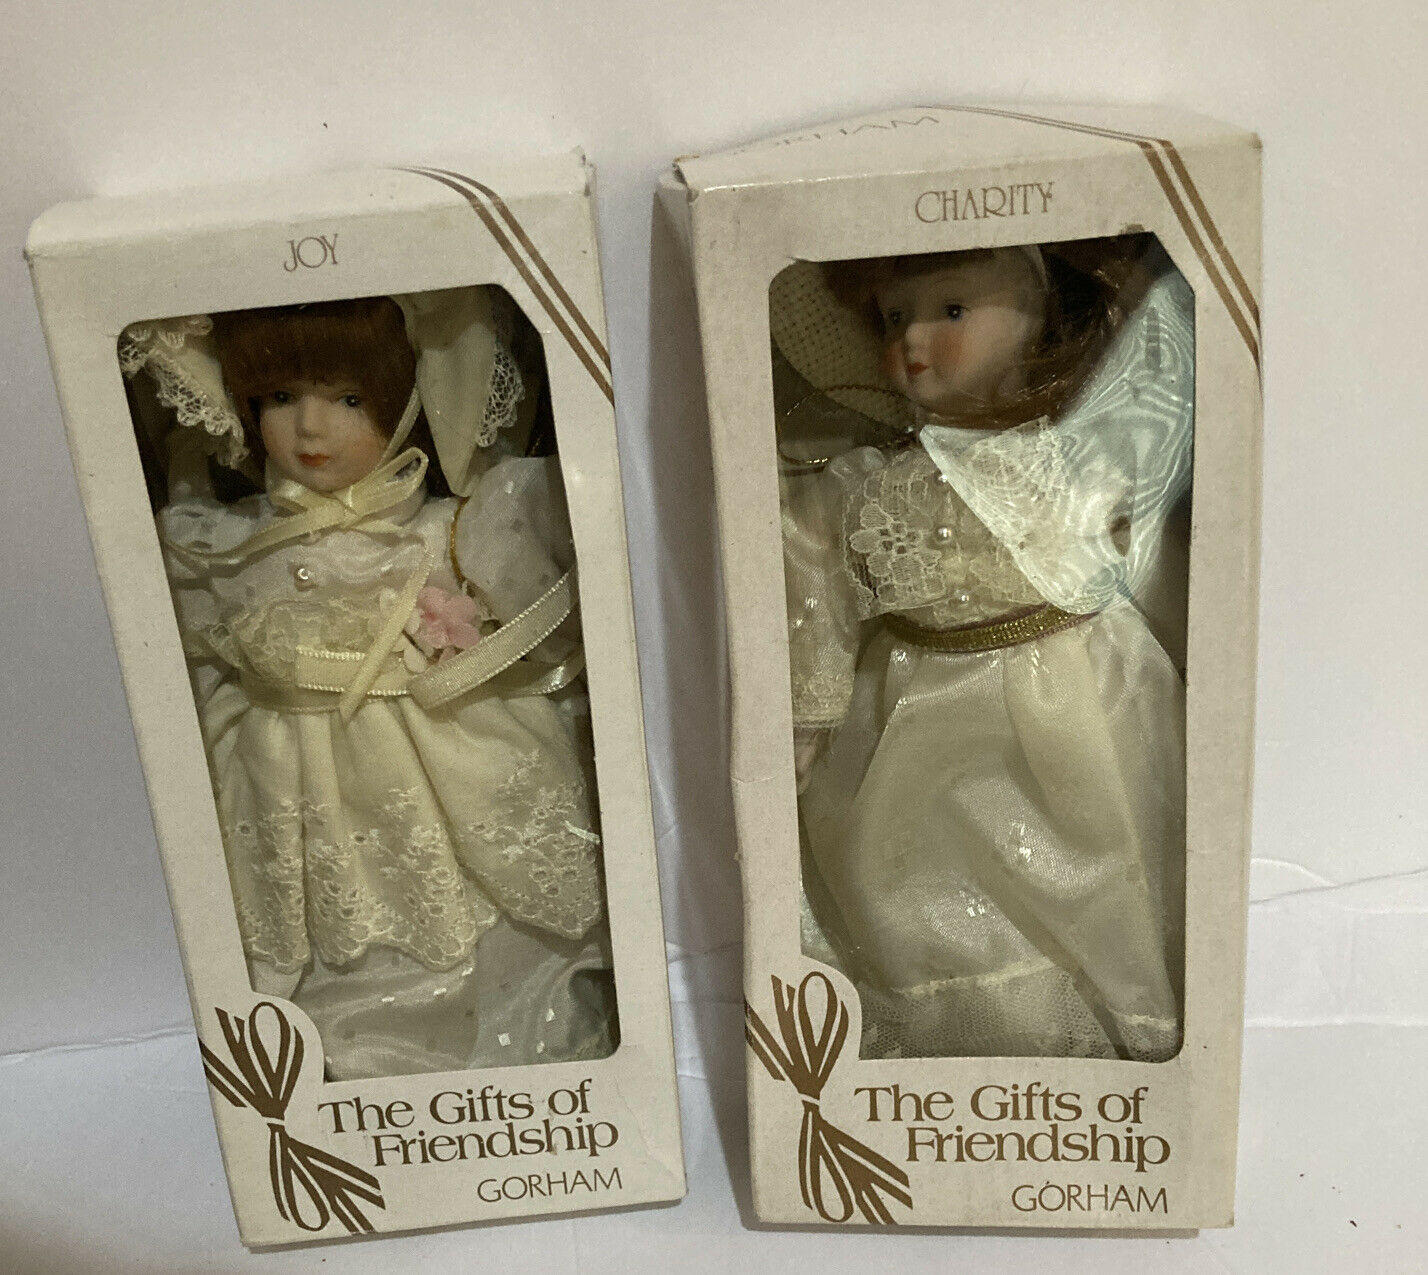 China Doll By Gorham: Charity And Joy Dolls In Original Box